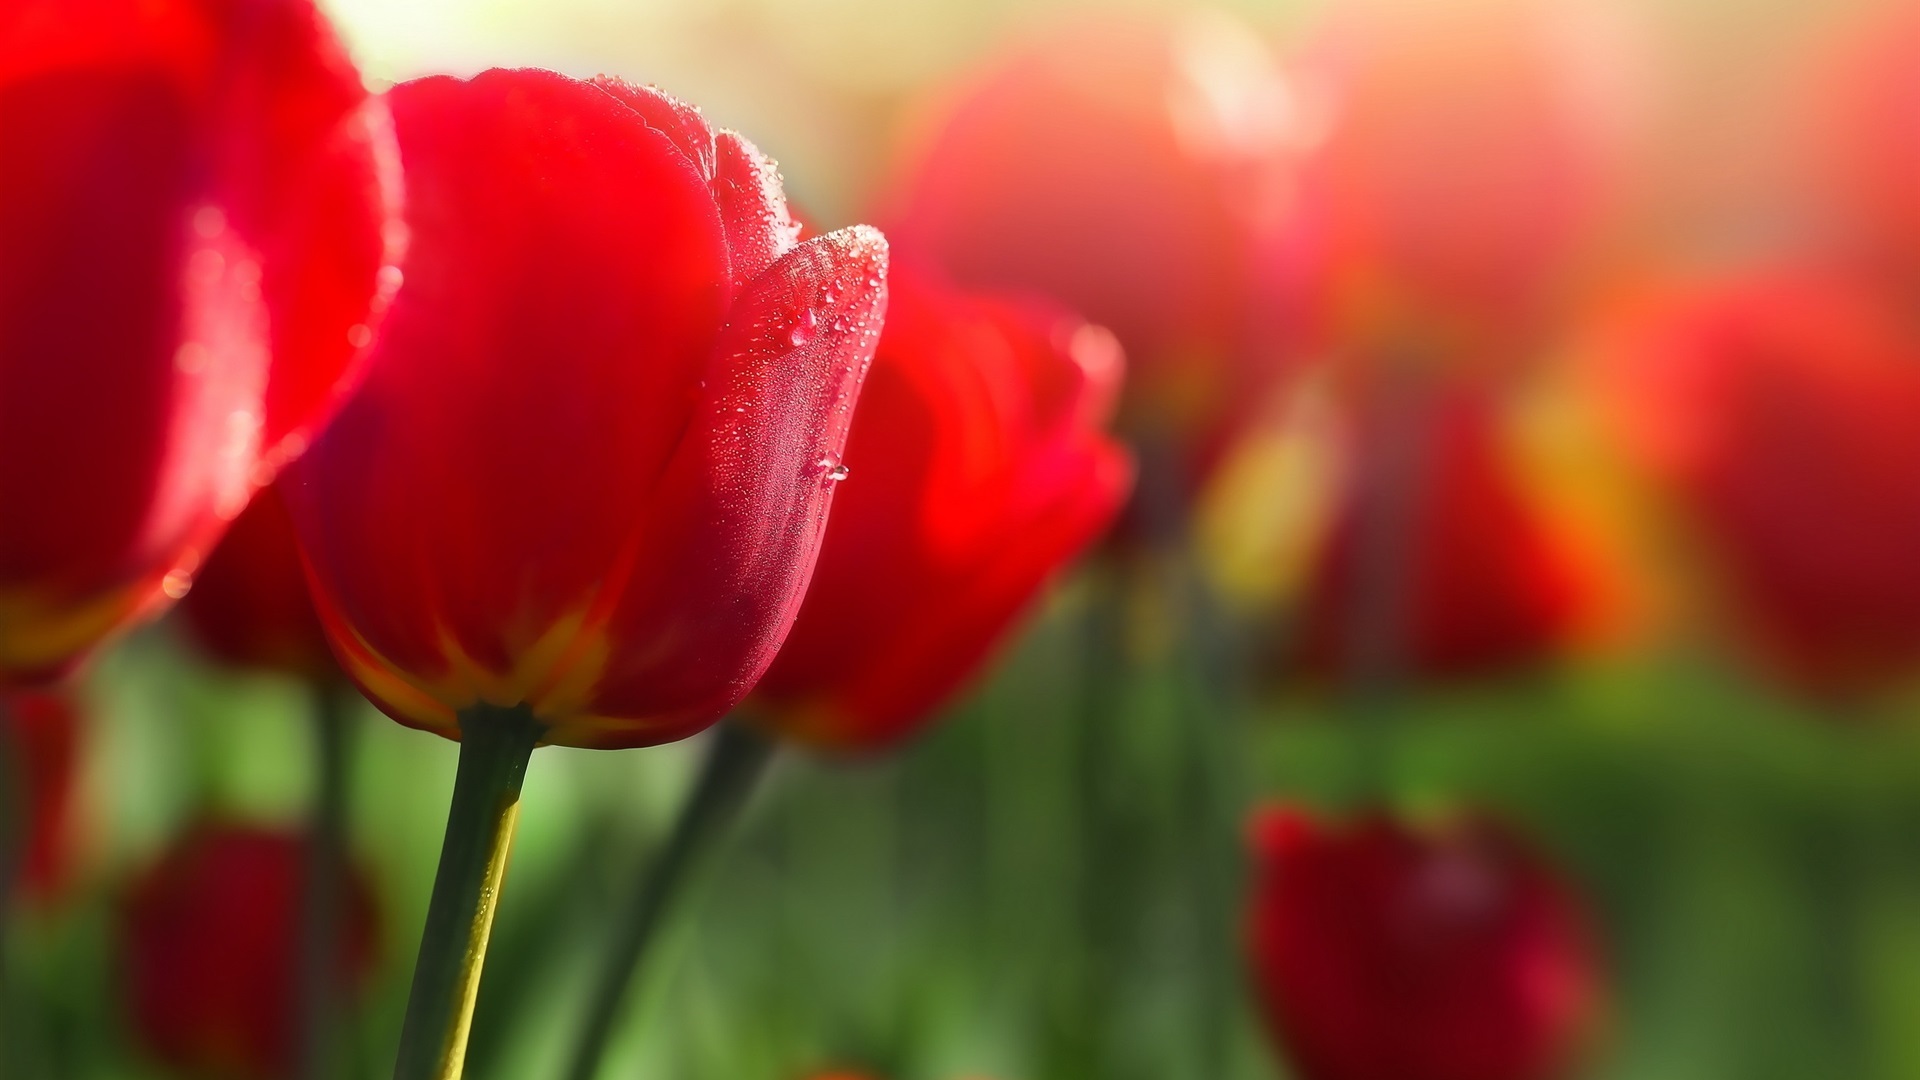 General 1920x1080 tulips flowers nature dew daylight plants red flowers